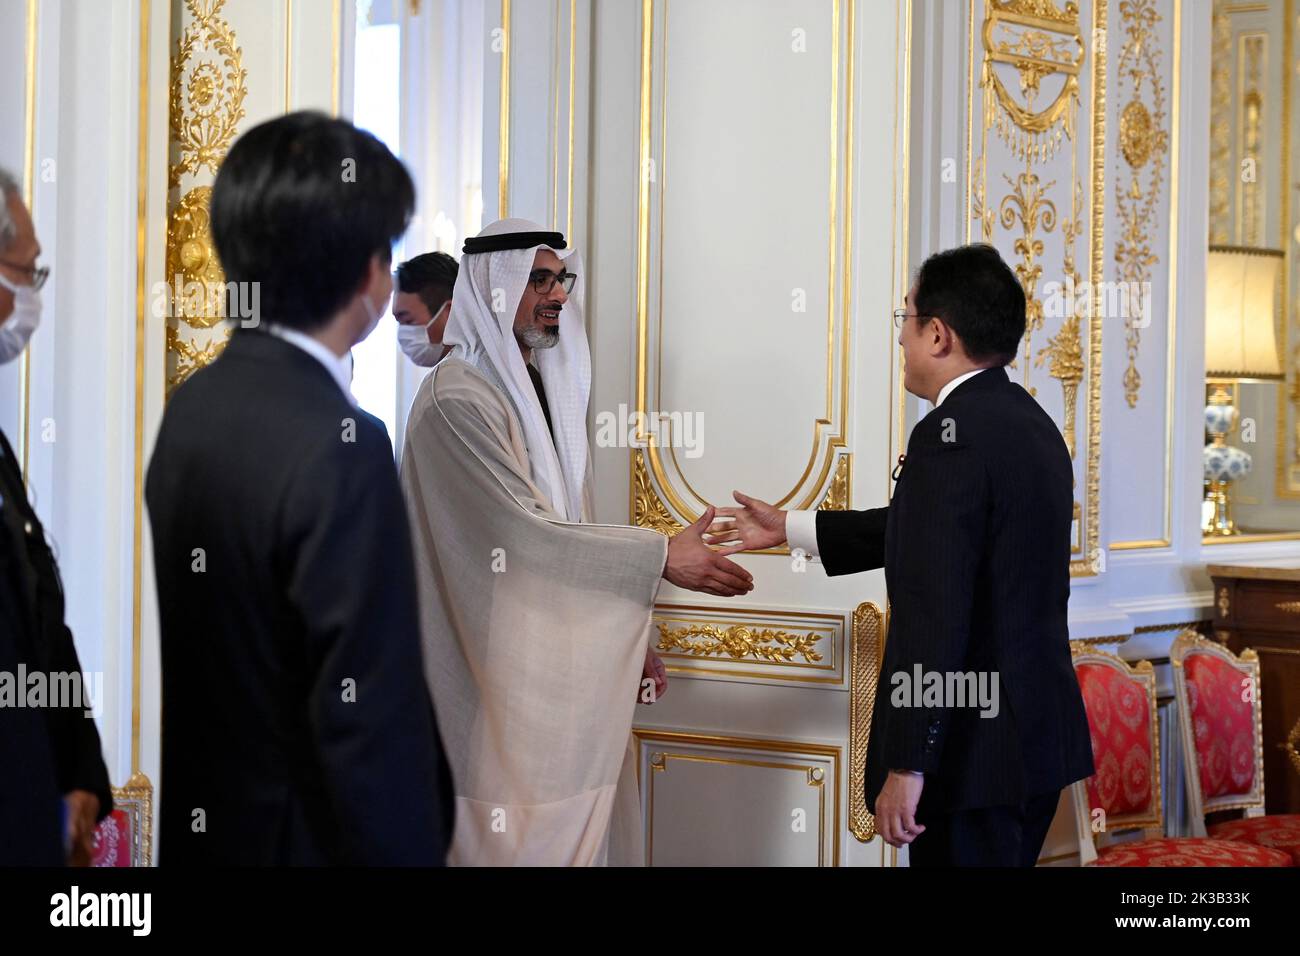 TOKYO, JAPAN - SEPTEMBER 26 : Sheikh Khalid bin Mohamed bin Zayed AL NAHYAN, Member of Abu Dhabi Executive Council, Chairman of Abu Dhabi Executive Office is welcomed by Japan's Prime Minister Fumio Kishida (R) prior their bilateral meeting at Akasaka Palace State Guest House in Tokyo, Japan on September 26, 2022 in Tokyo, Japan. Sheikh Khalid bin Mohamed bin Zayed AL NAHYAN is visiting Japan within the state funeral for former Prime Minister Shinzo Abe that will be held on September 27, in the capital of Japan. David Mareuil/Pool via REUTERS Stock Photo